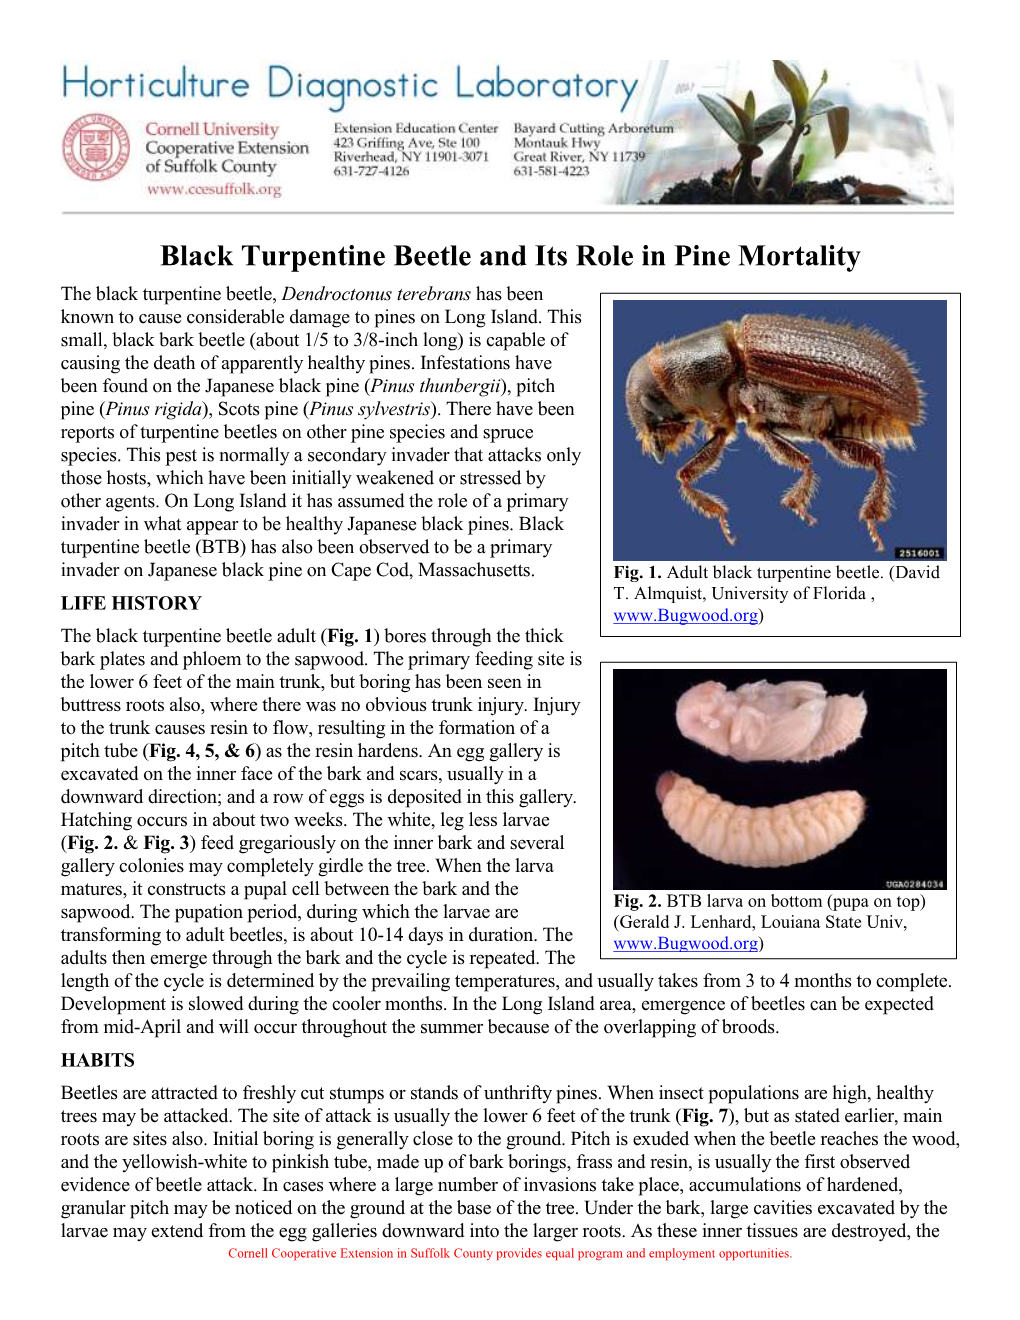 Black Turpentine Beetle and Its Role in Pine Mortality